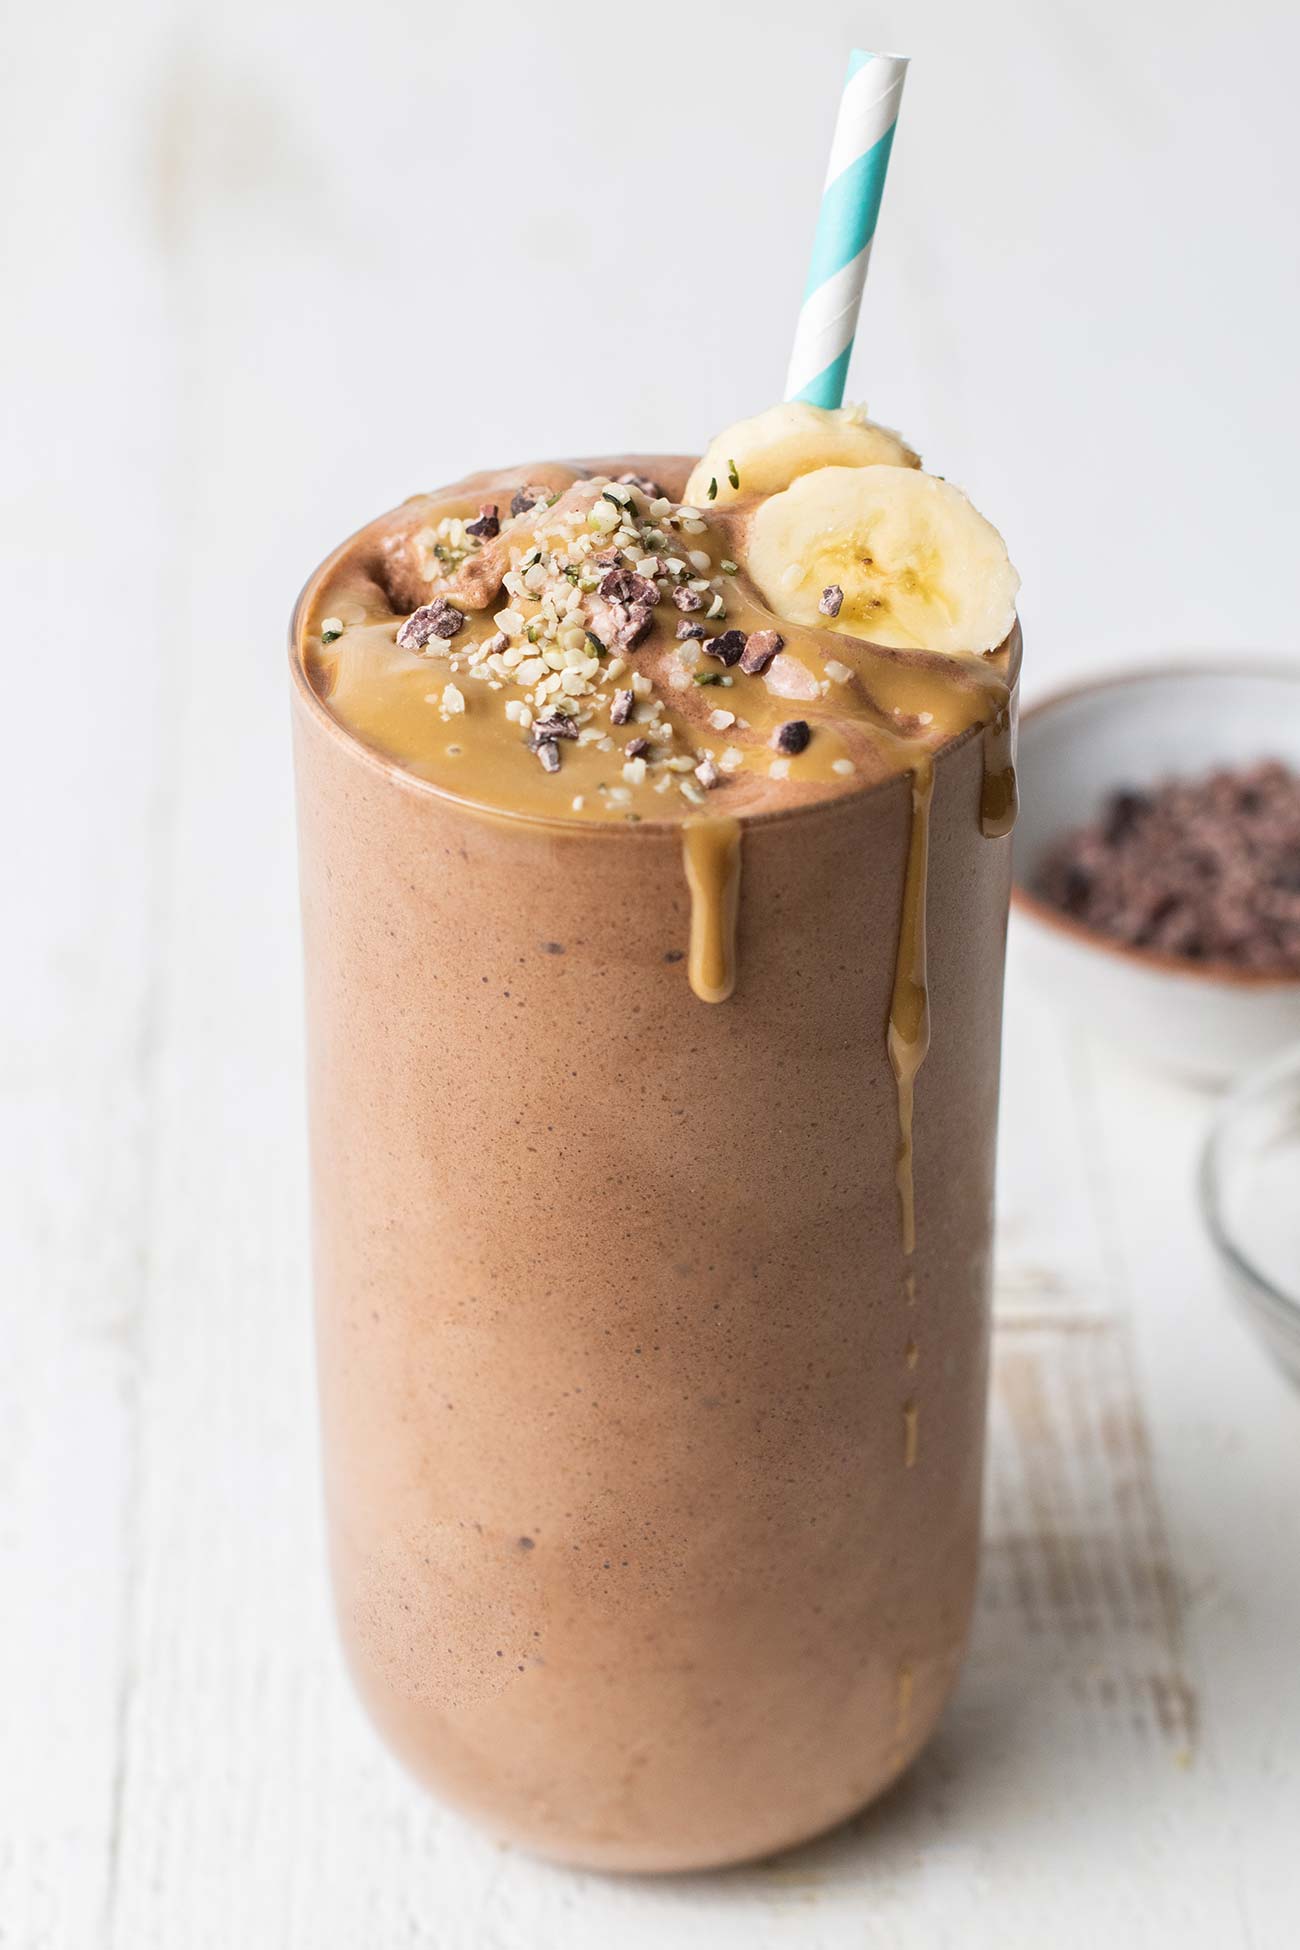 A chocolate banana smoothie shown drizzled with peanut butter and cocoa nibs.